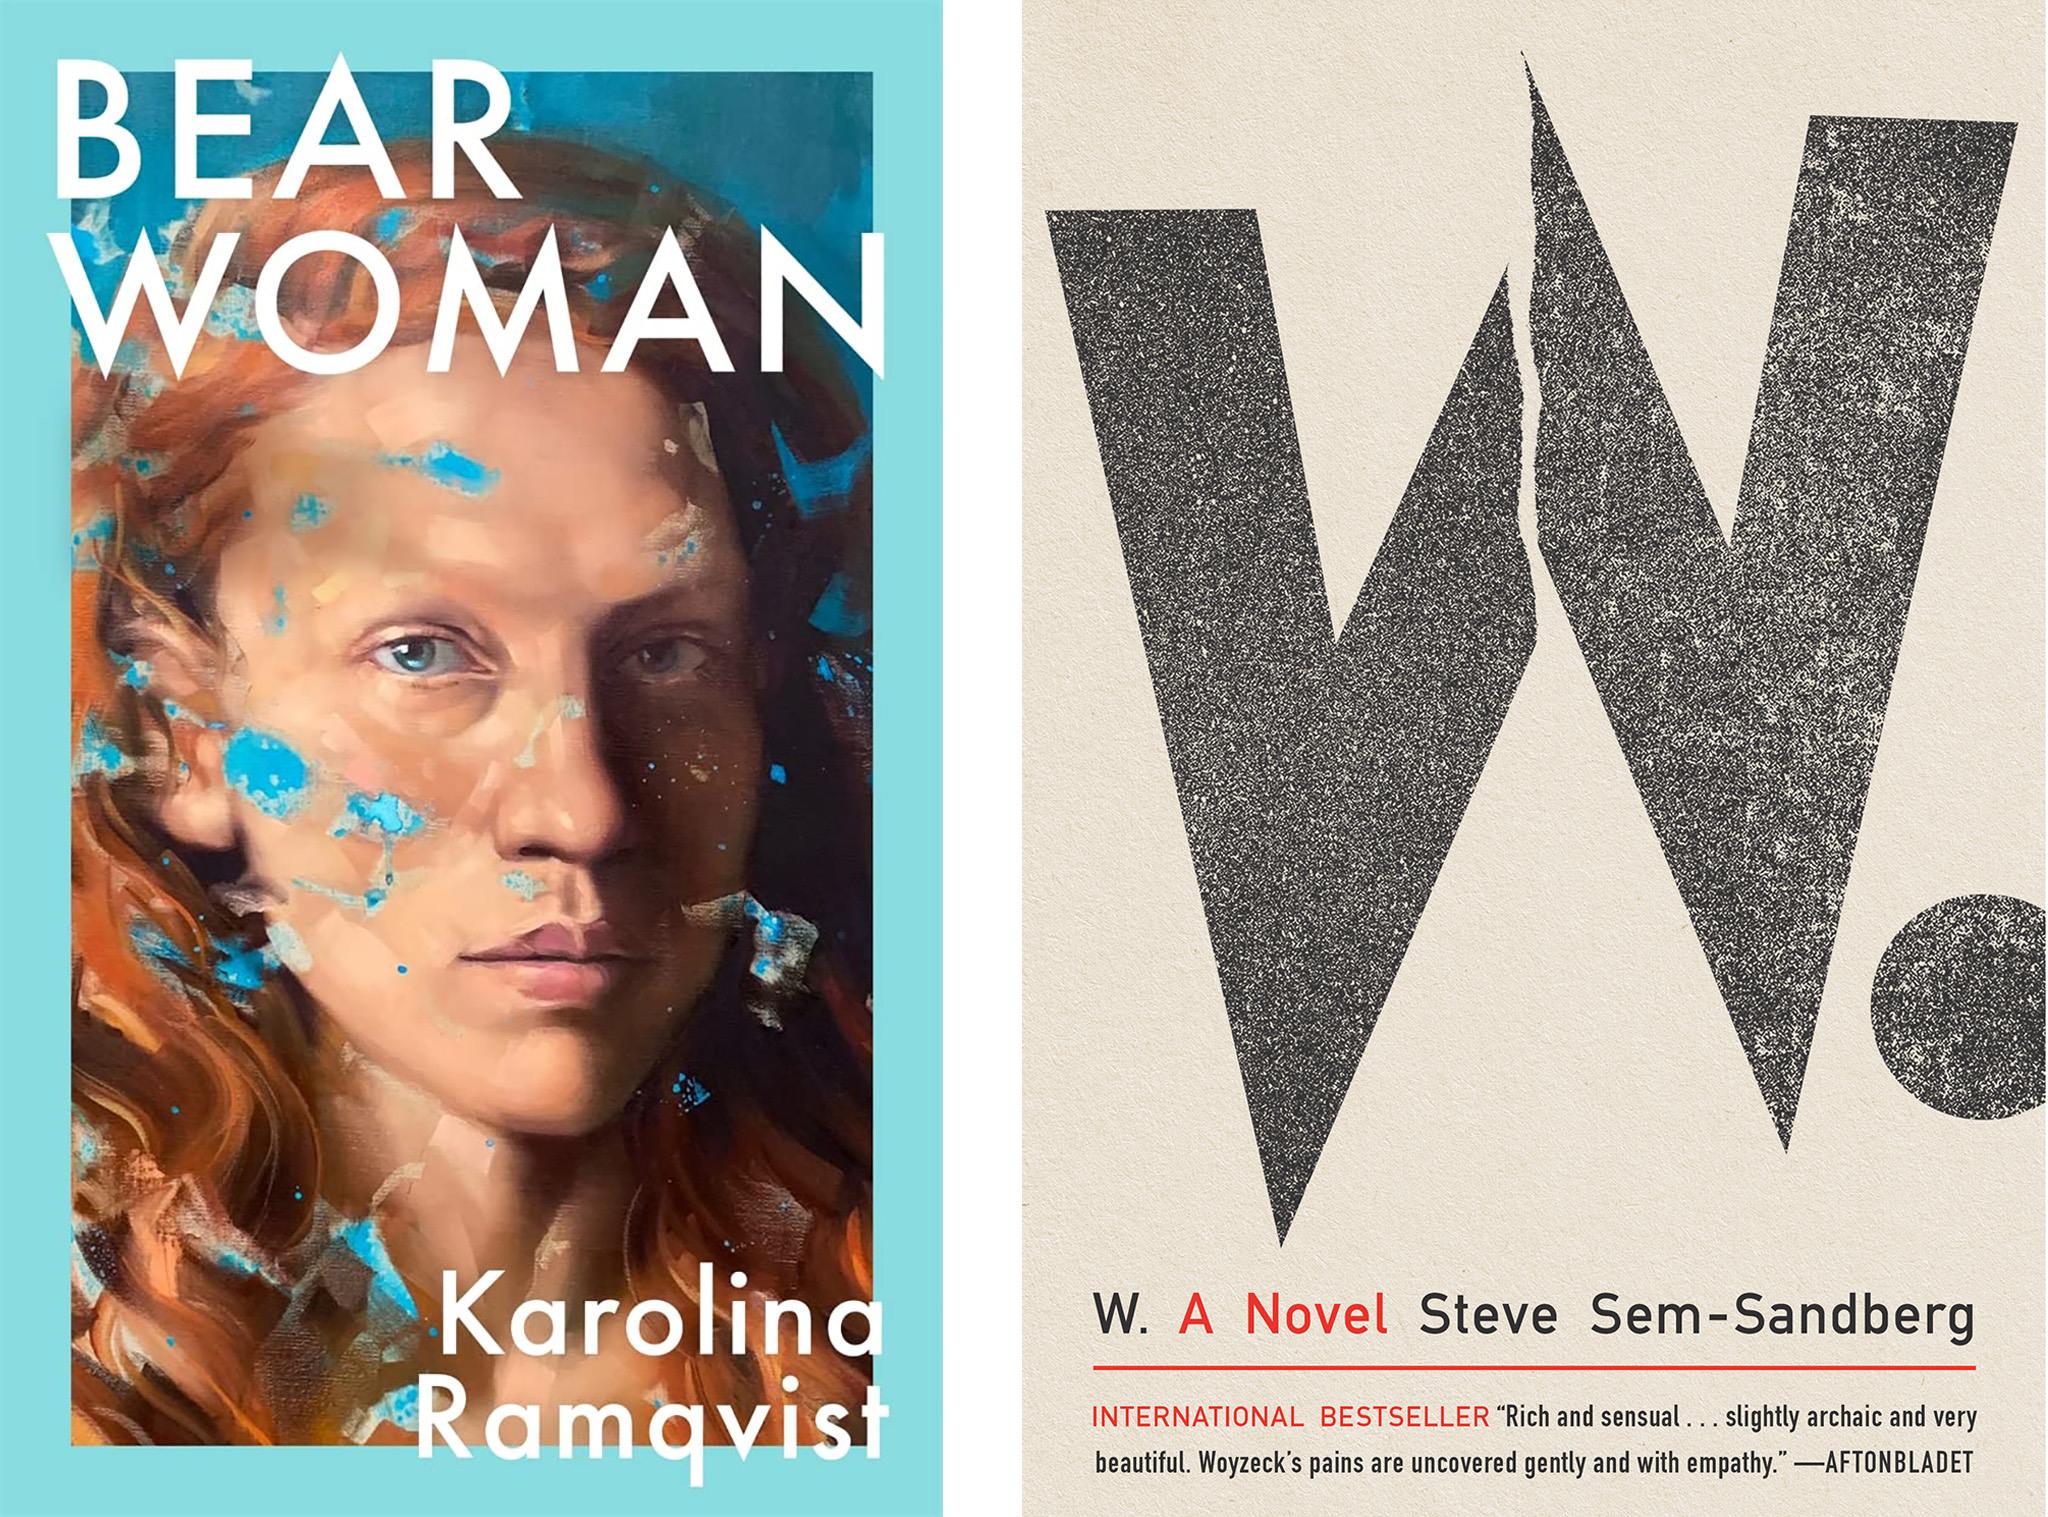 Two book covers: The Bear Woman and W.